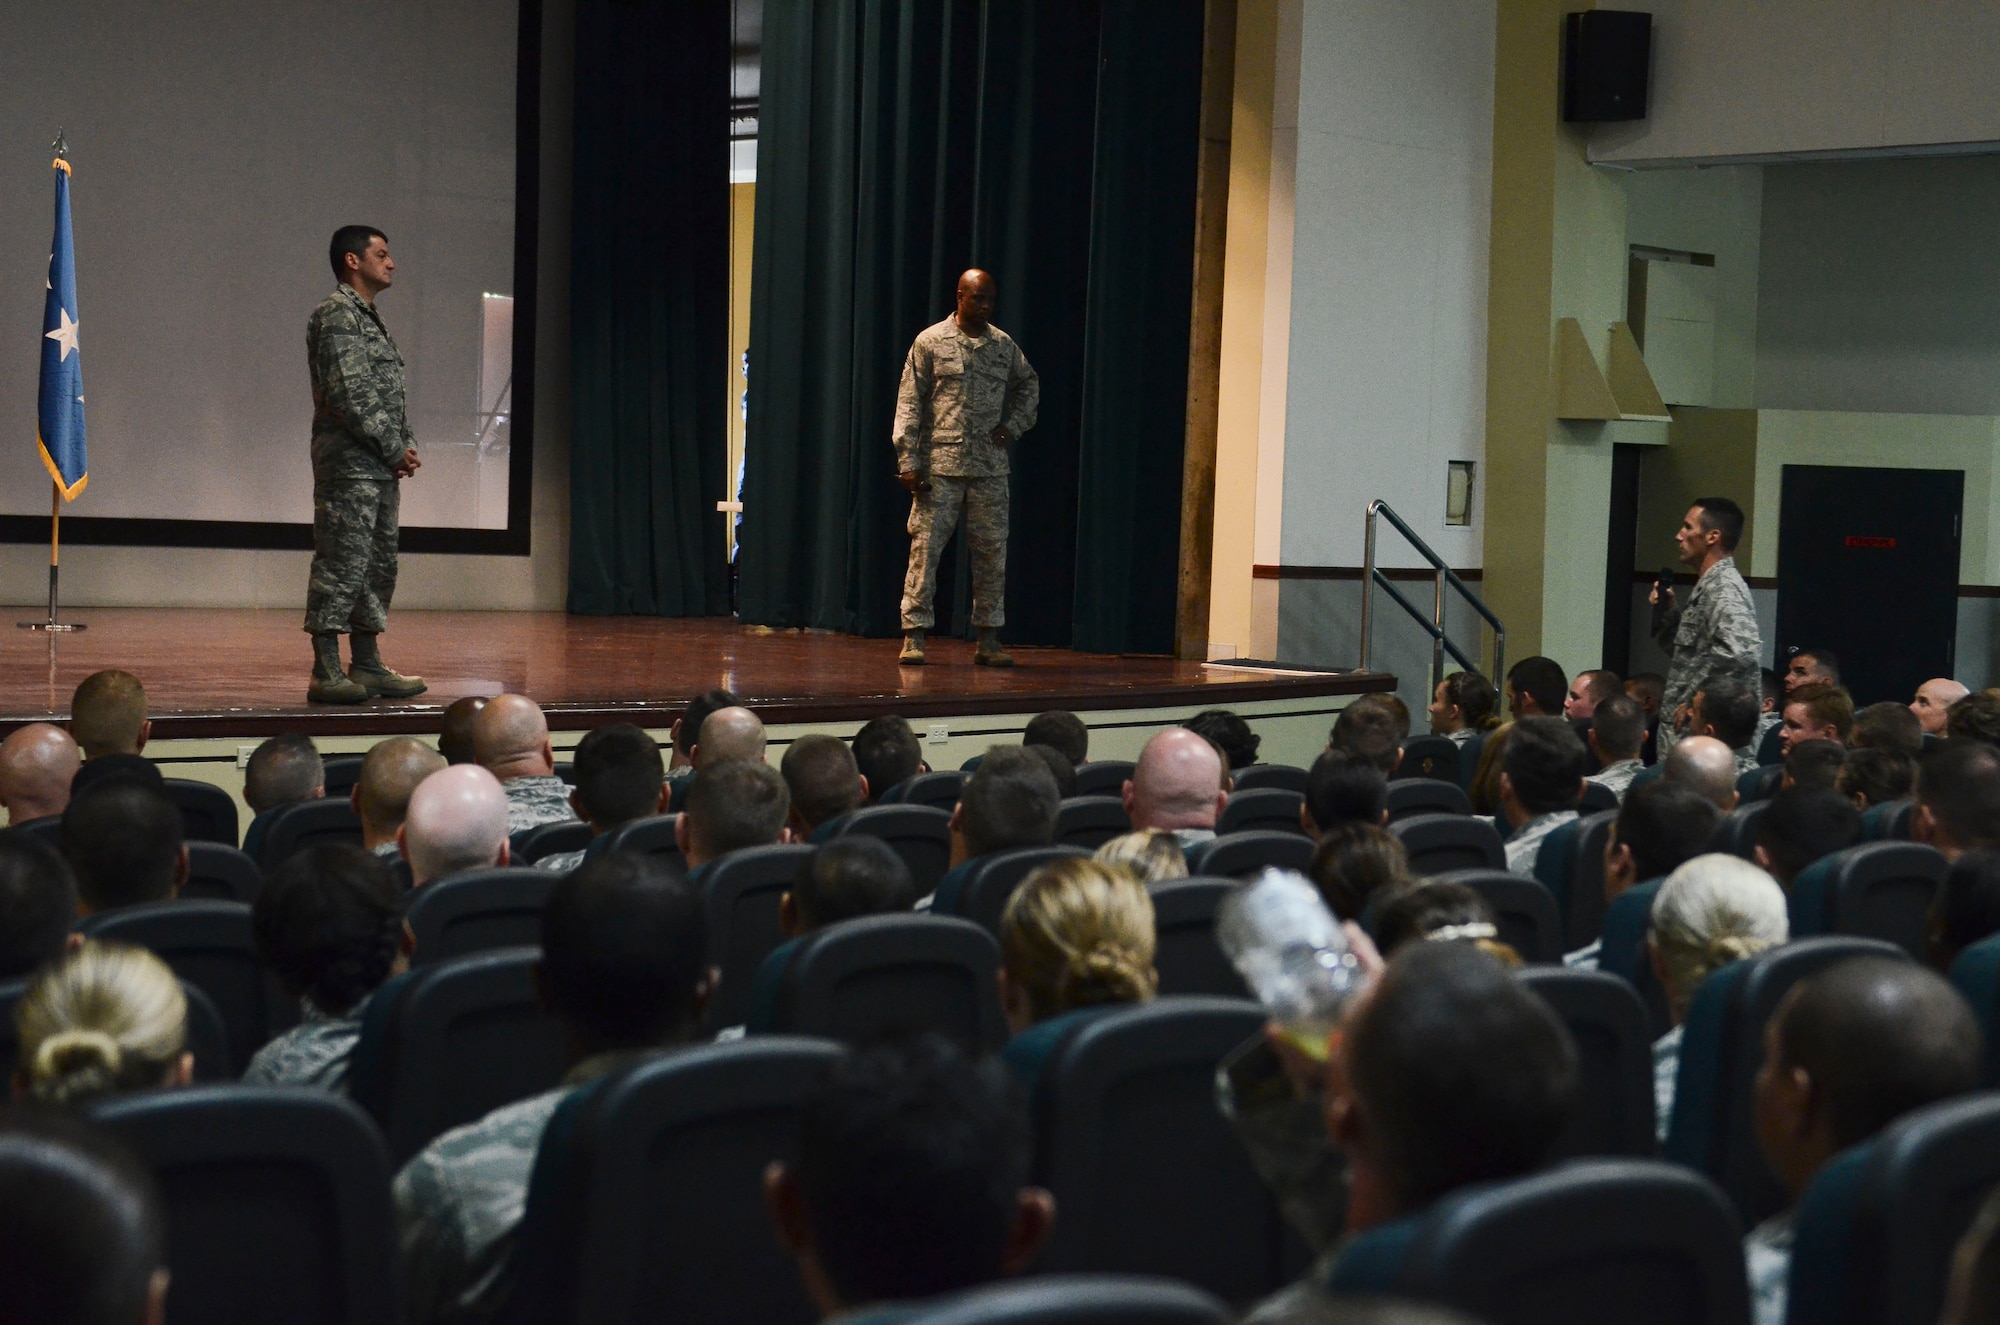 (Right) Lt. Col. Steve Harrold, 36th Operations Group deputy commander, asks Lt. Gen. Russell Handy, 11th Air Force commander, a question during an all call June 19, 2014, on Andersen Air Force Base, Guam. Handy took the opportunity to address Andersen’s Airmen following the 36th Wing change of command. (U.S. Air Force photo by Airman 1st Class Emily A. Bradley/Released)